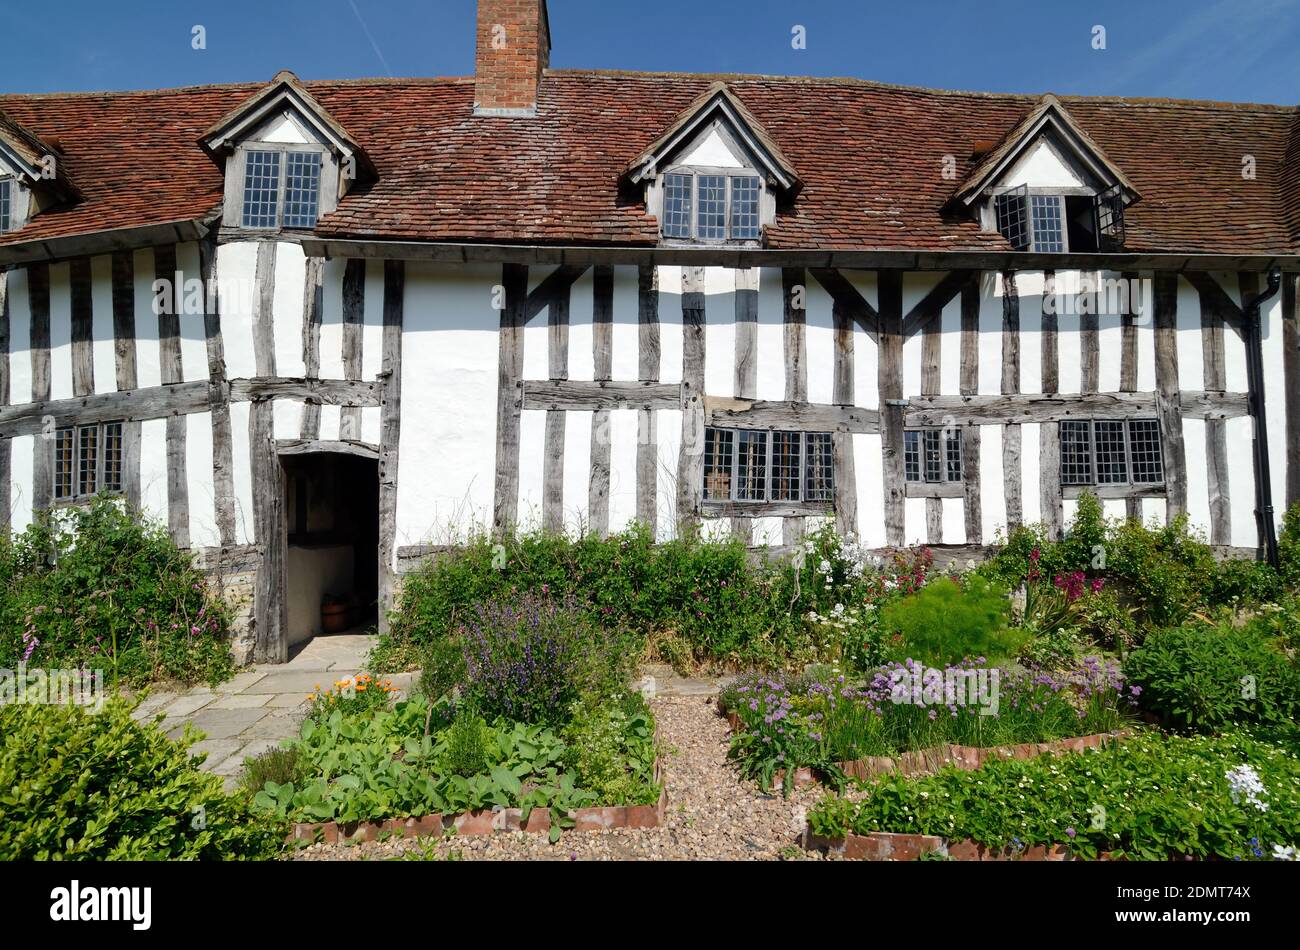 Mary Arden House Traditional Half-Timber English Cottage dans le village de Wilmcote Stratford-upon-Avon Warwickshire Angleterre Banque D'Images